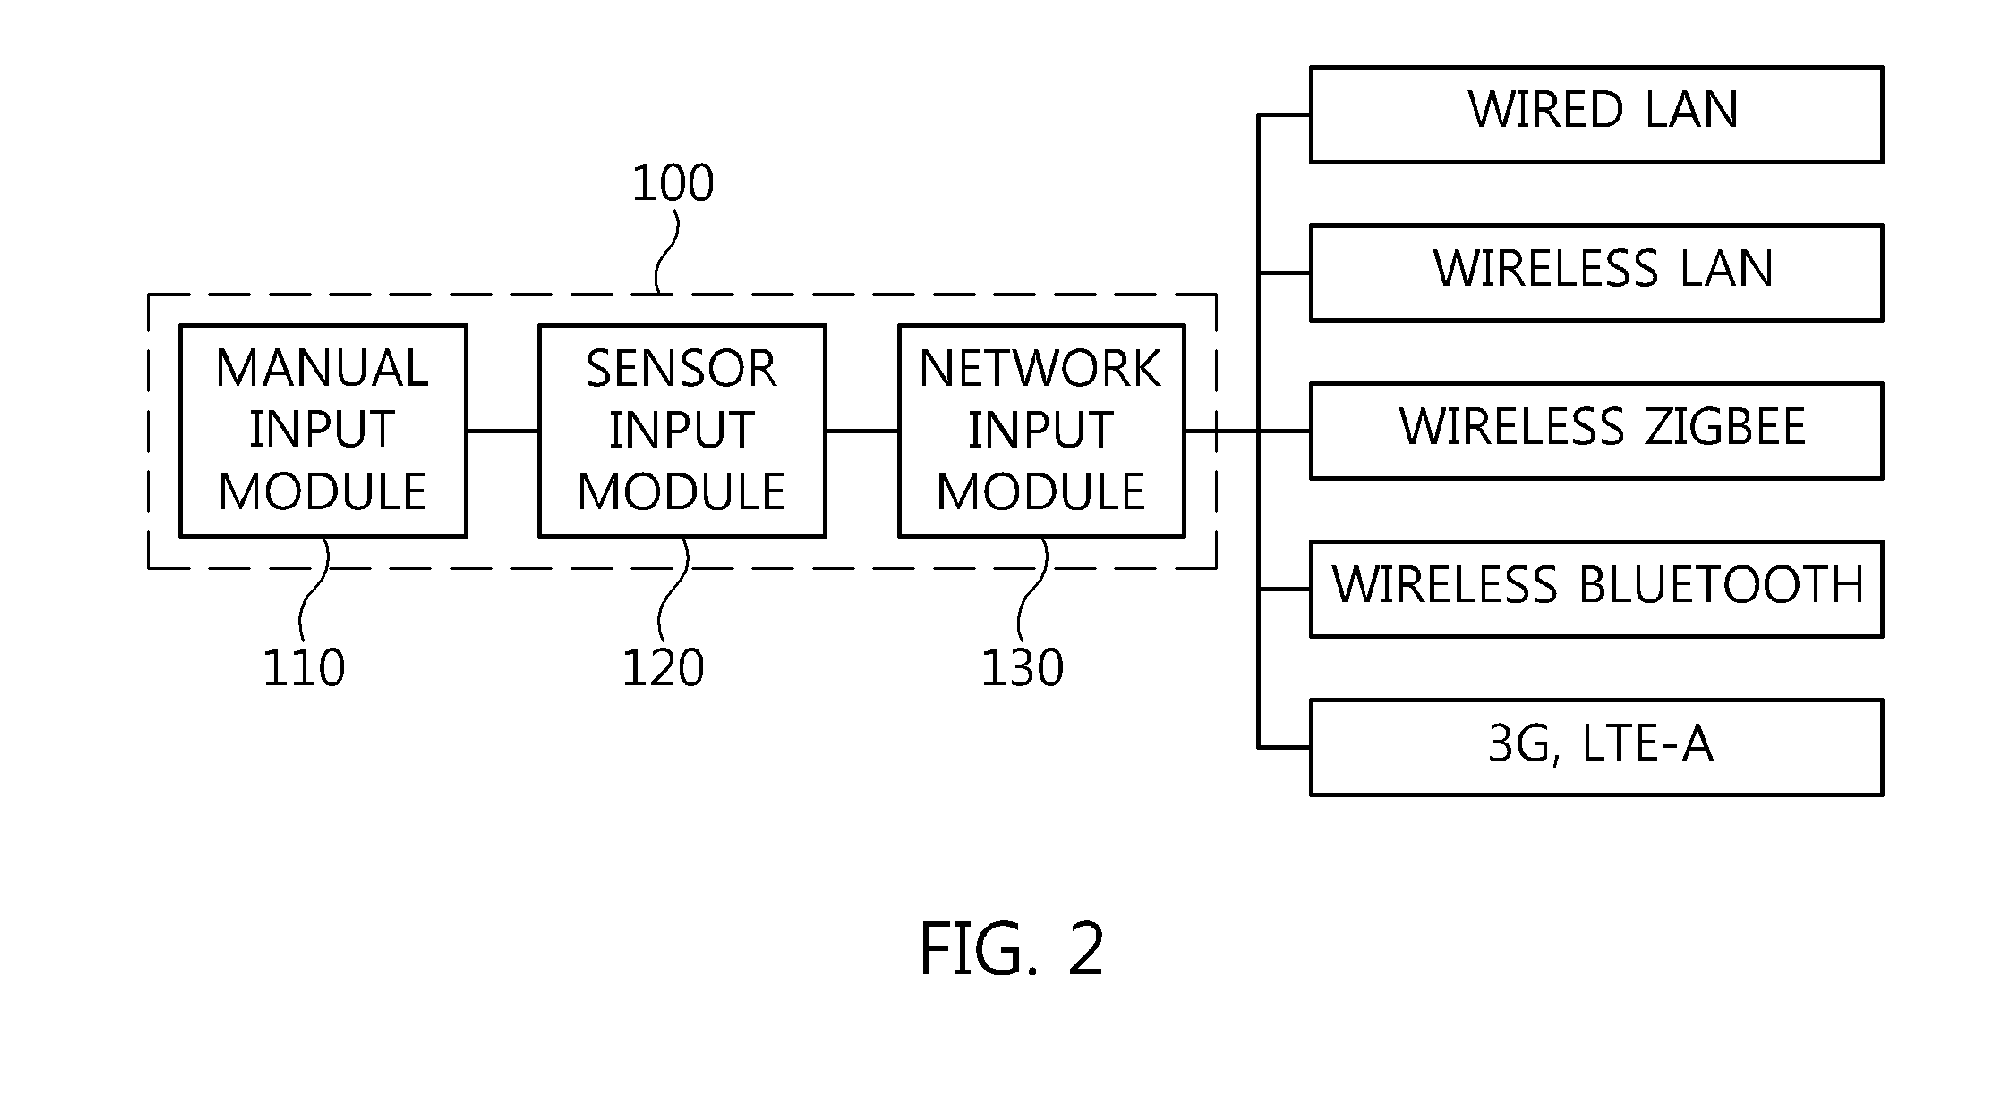 Apparatus and method for controlling lighting based on internet protocol network